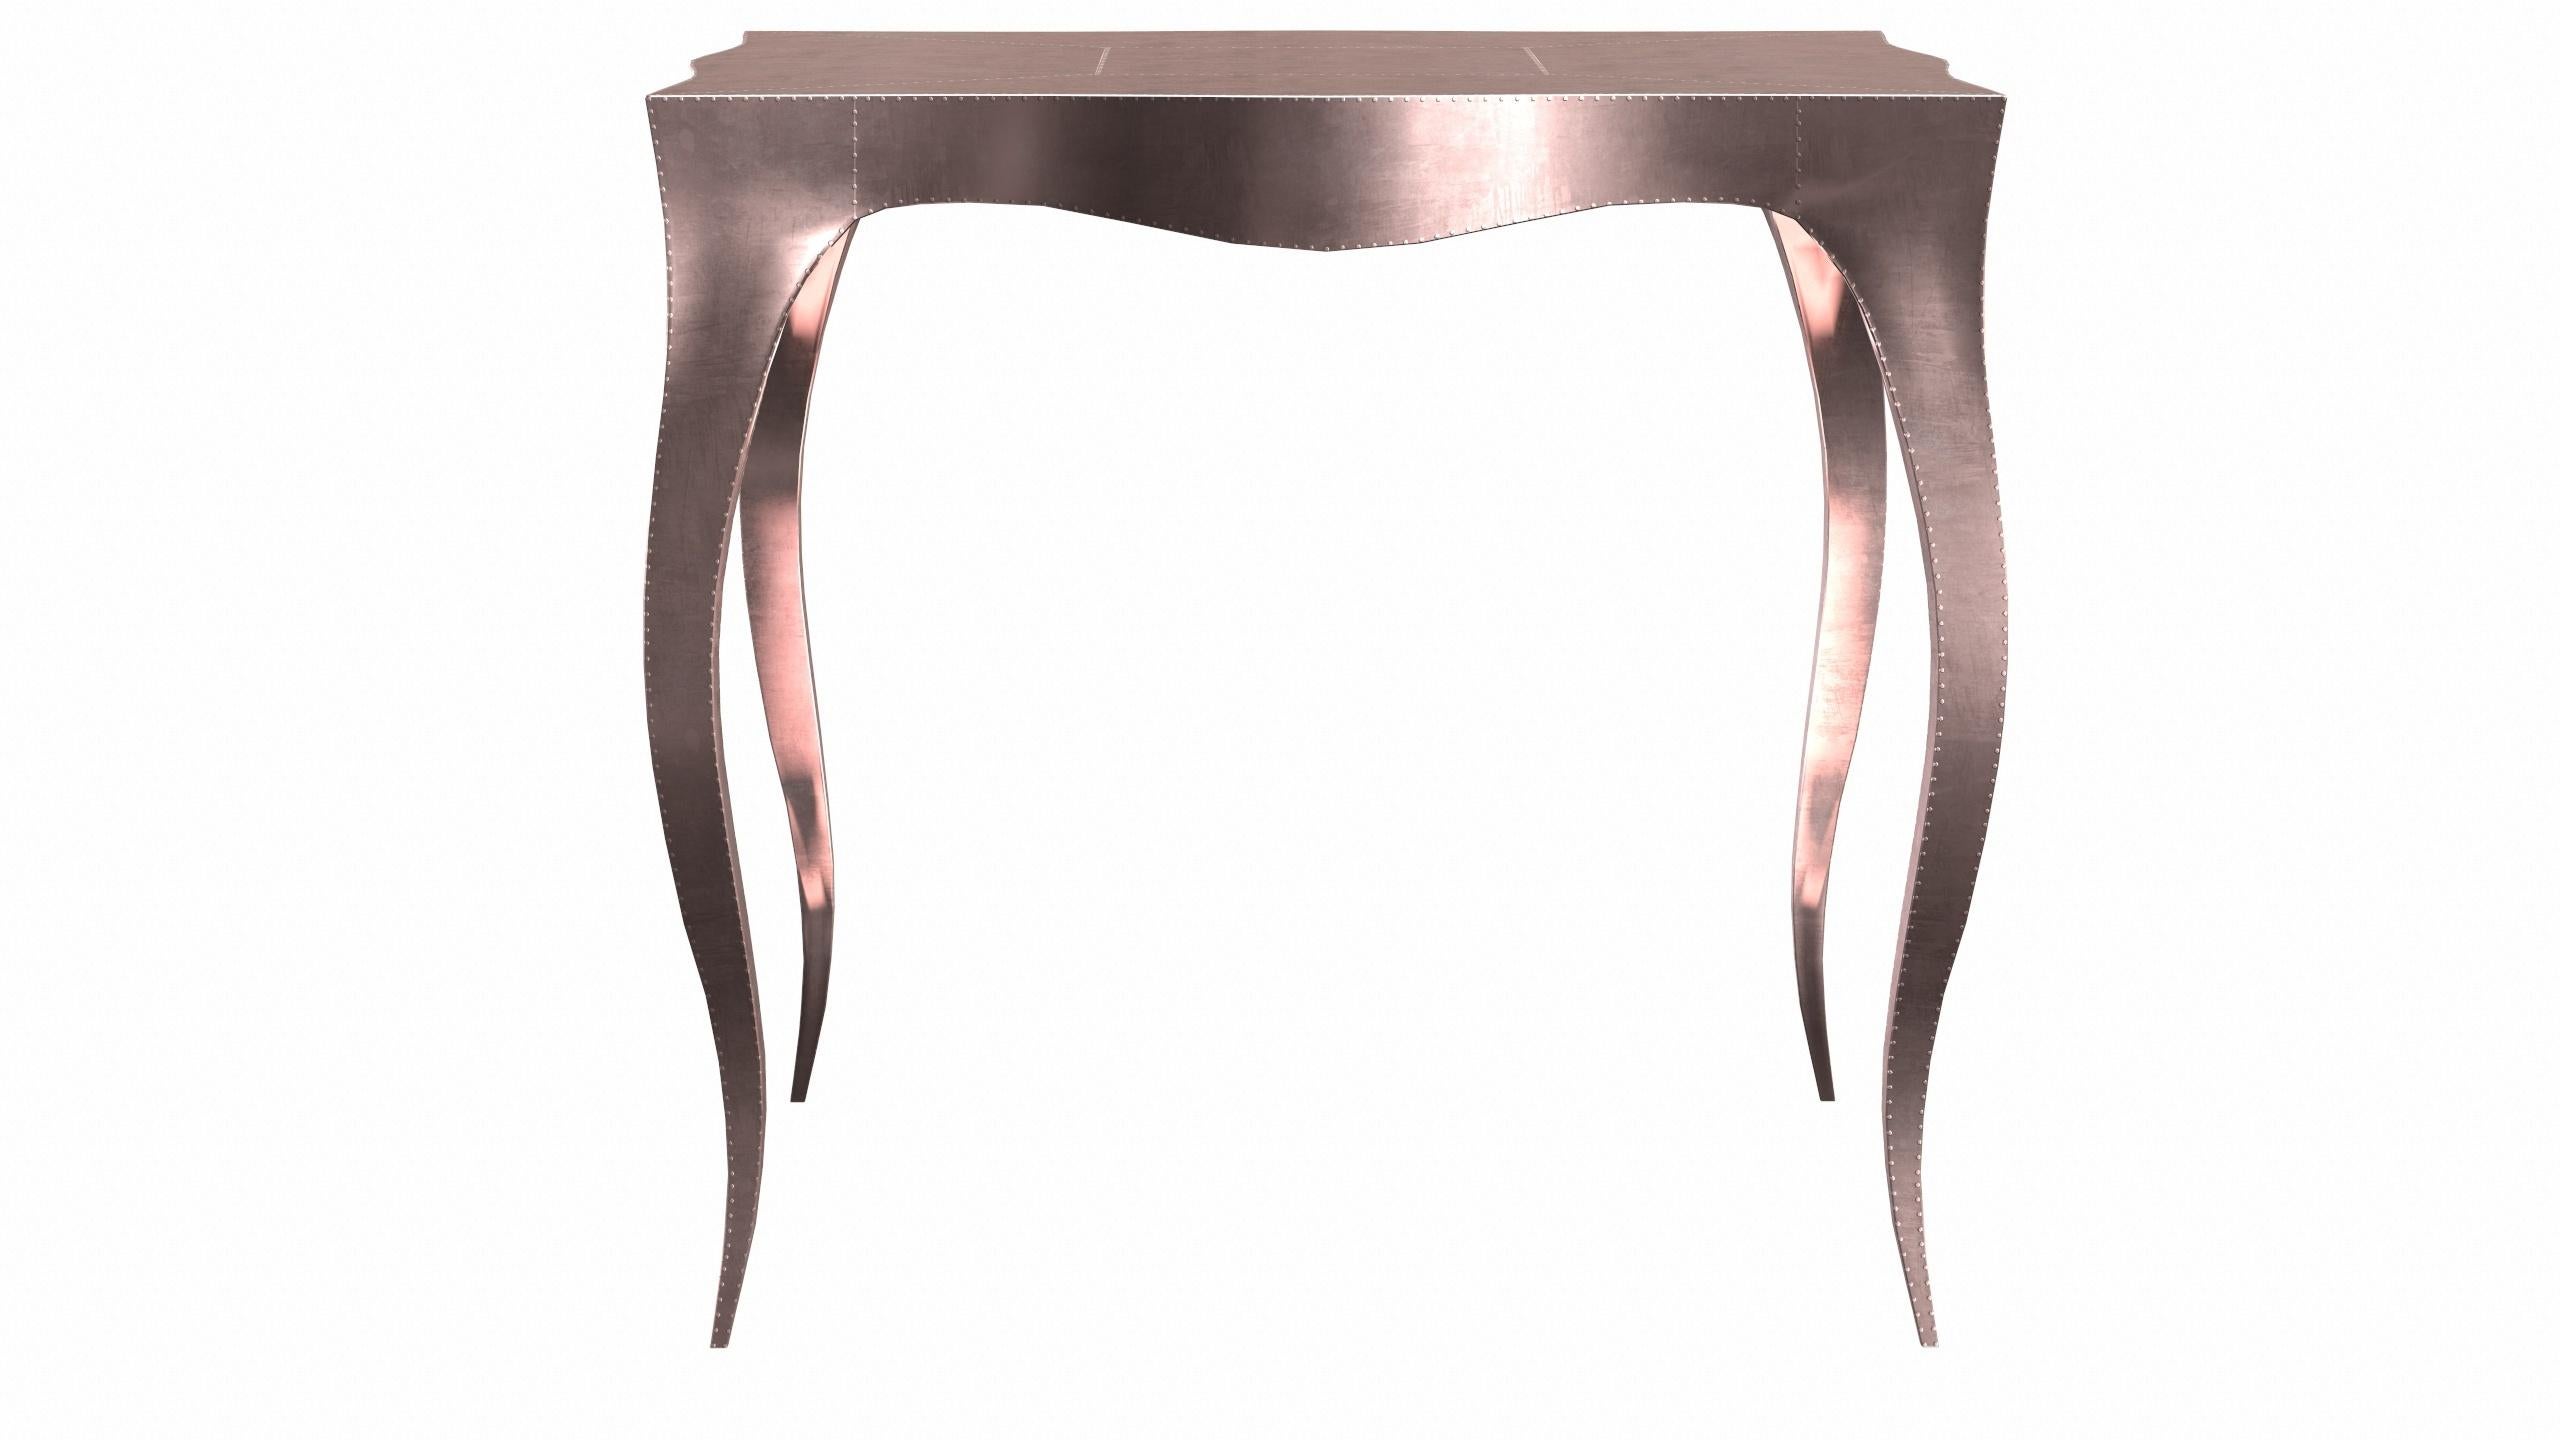 Américain Louise Art Deco Coffee and Cocktail Tables Smooth Copper by Paul Mathieu en vente